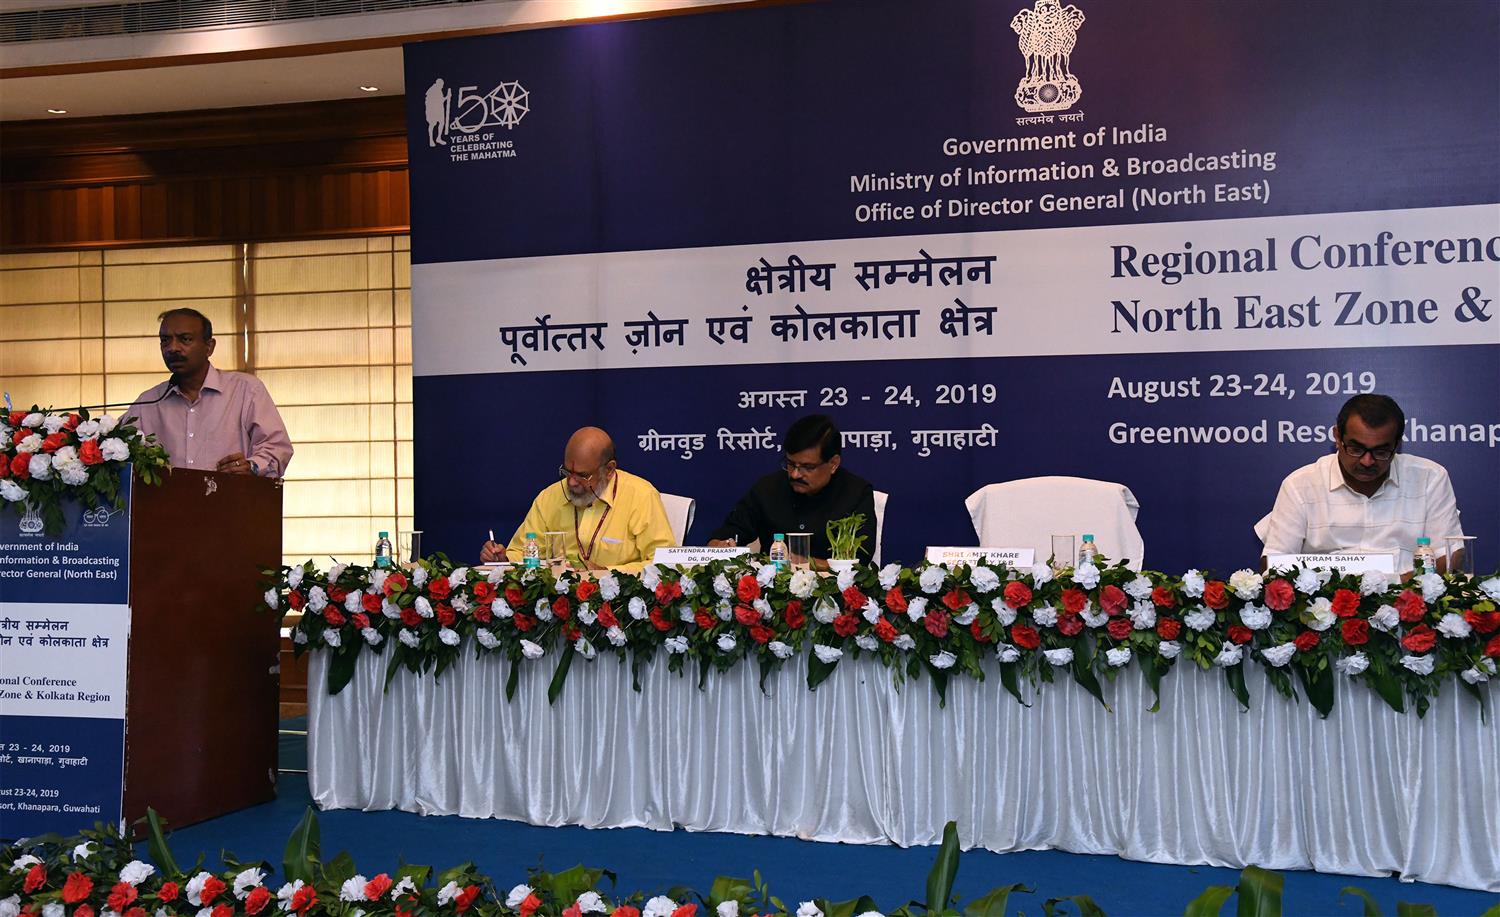 Shri. Amit Khare, Secretary Ministry of I& B  delivering his speech at the  Regional Conference of NE Zone &  Kolkata Region  at Guwahati  on 24th August 2019, Shri. Vikram Sahay Joint Secretary, Ministry of I& B ,Shri. L.R Vishwanath, Director General North East Zone and Shri. Satyendra Prakash, Director General, BOC, New Delhi are also seen in the picture.